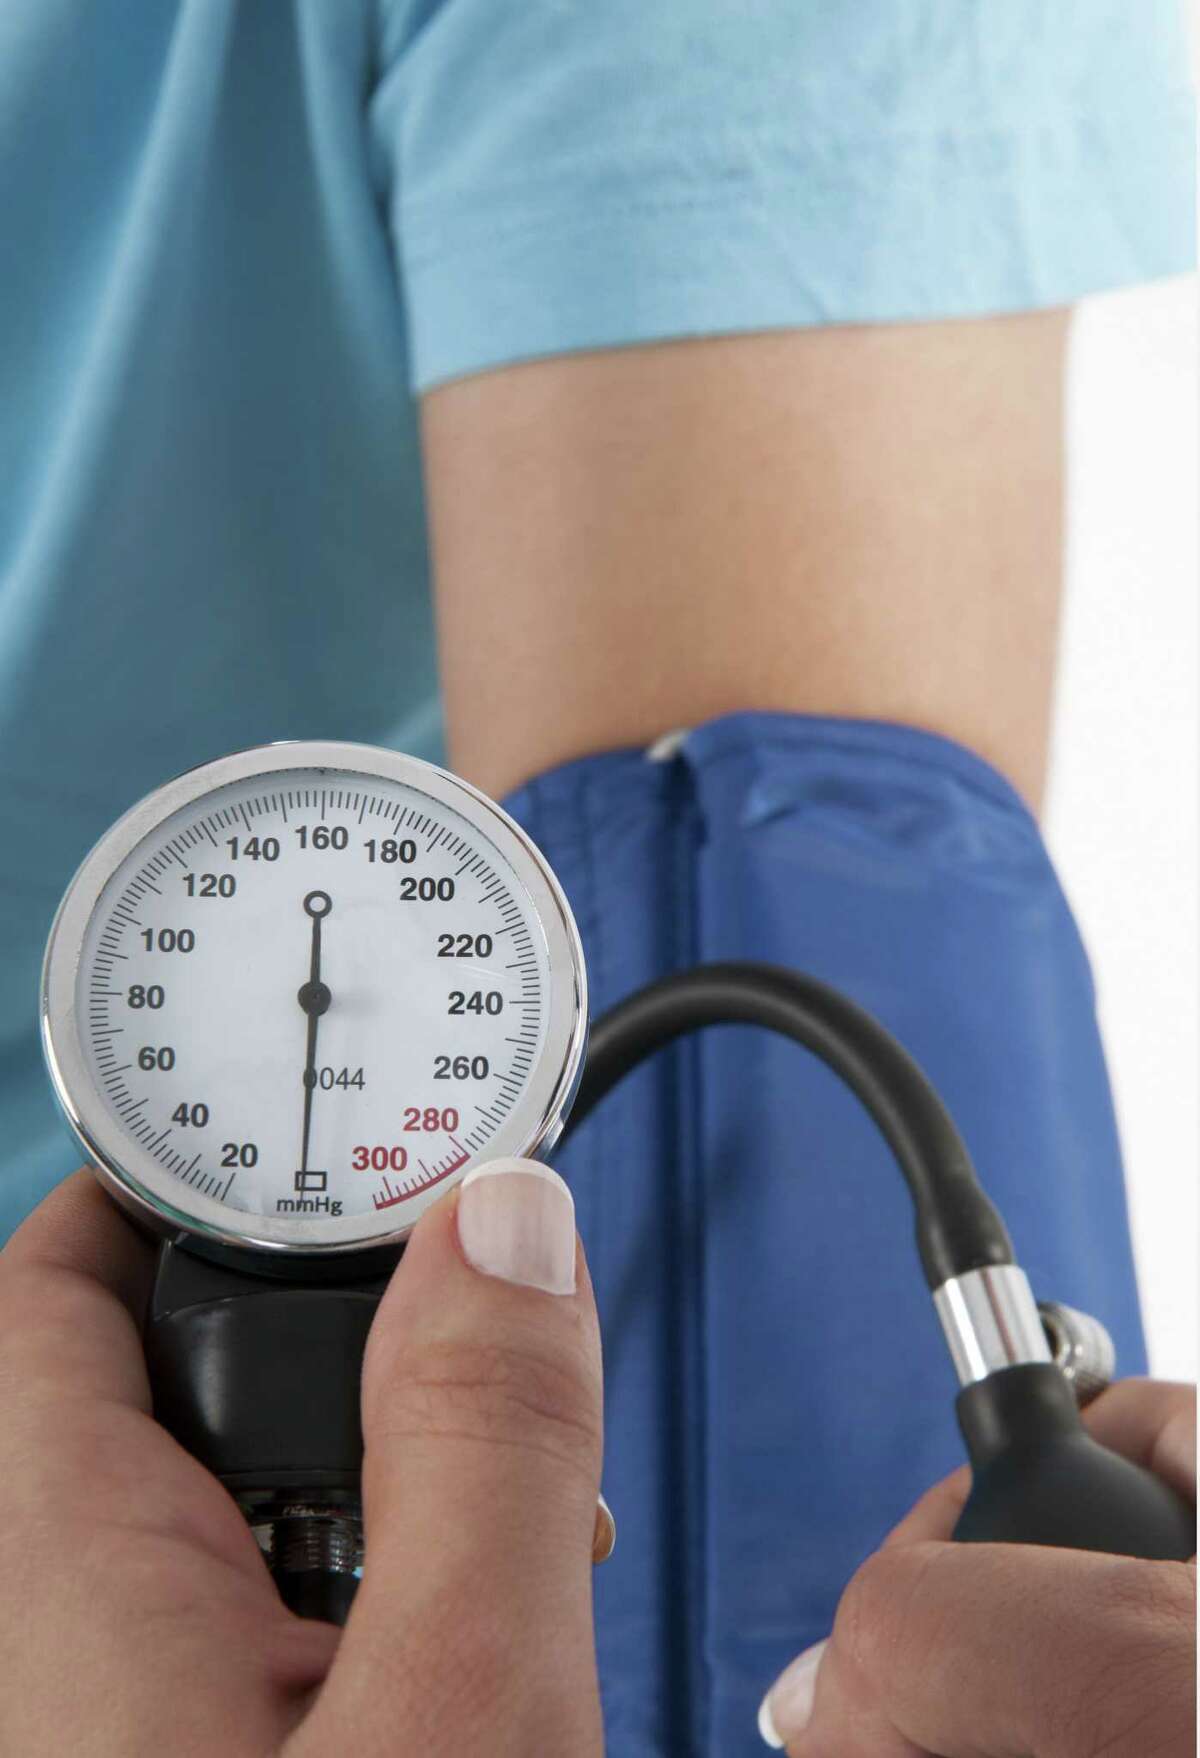 new-guidelines-say-higher-blood-pressure-ok-for-older-adults